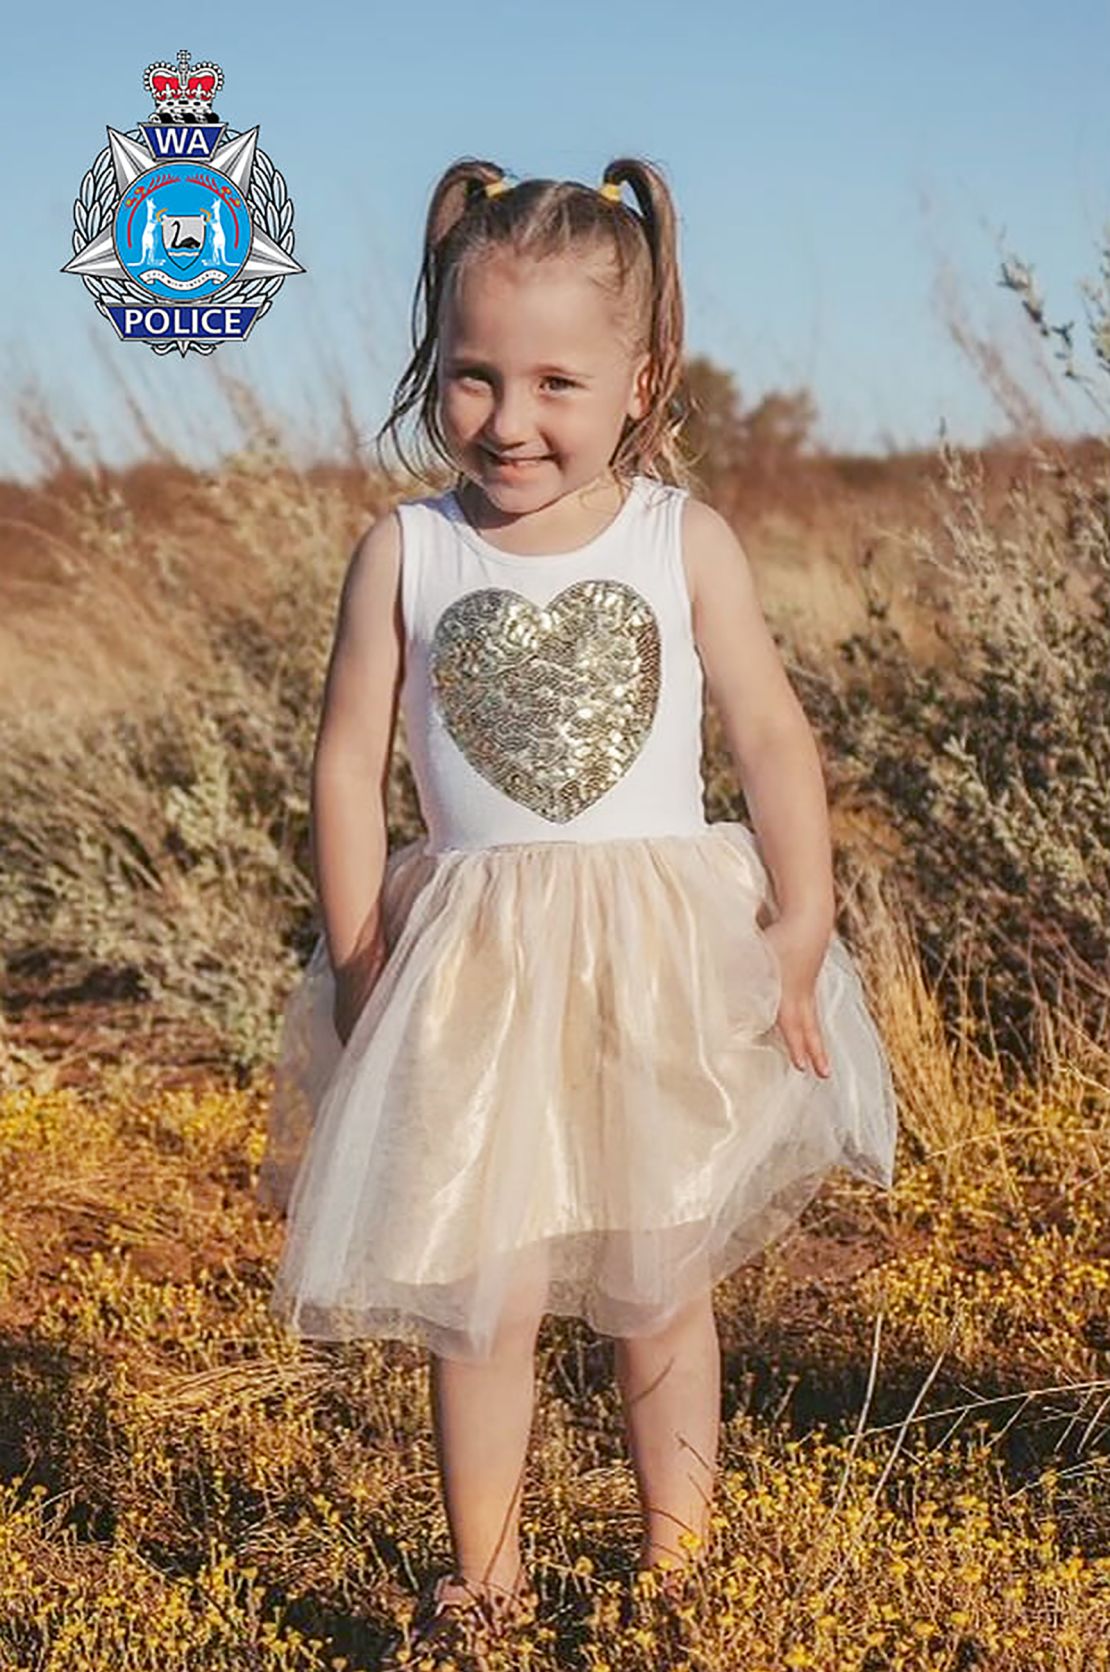 Australian authorities are searching for four-year-old Cleo Smith, who went missing from  Blowholes campsite in Macleod